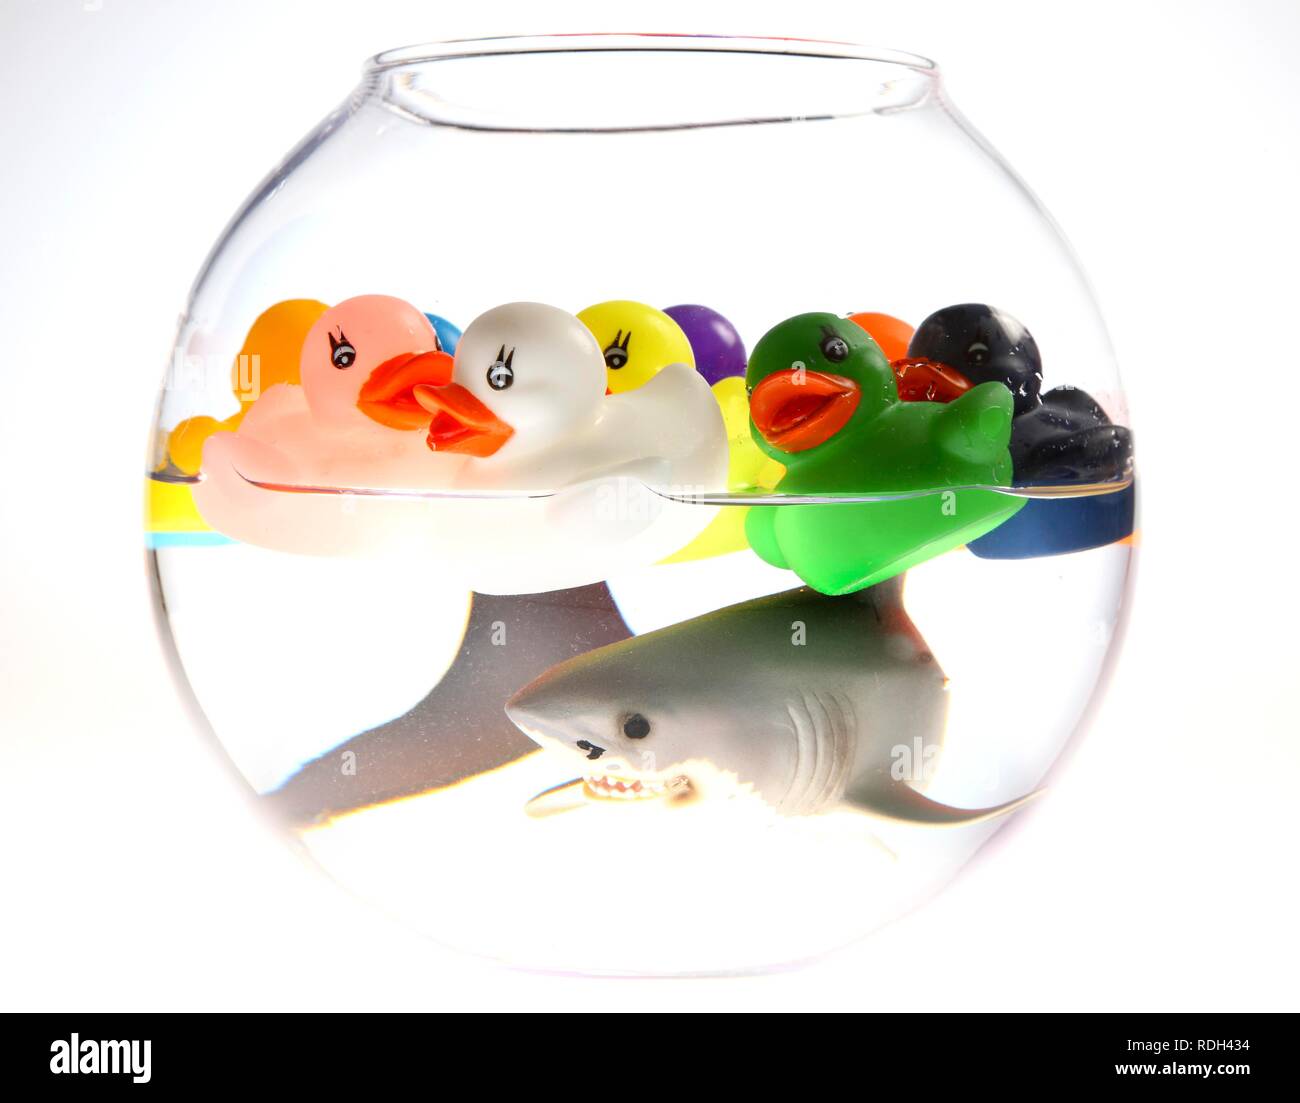 Water toys, many rubber ducks and a shark swimming in a fish bowl, illustration, symbolic image Stock Photo